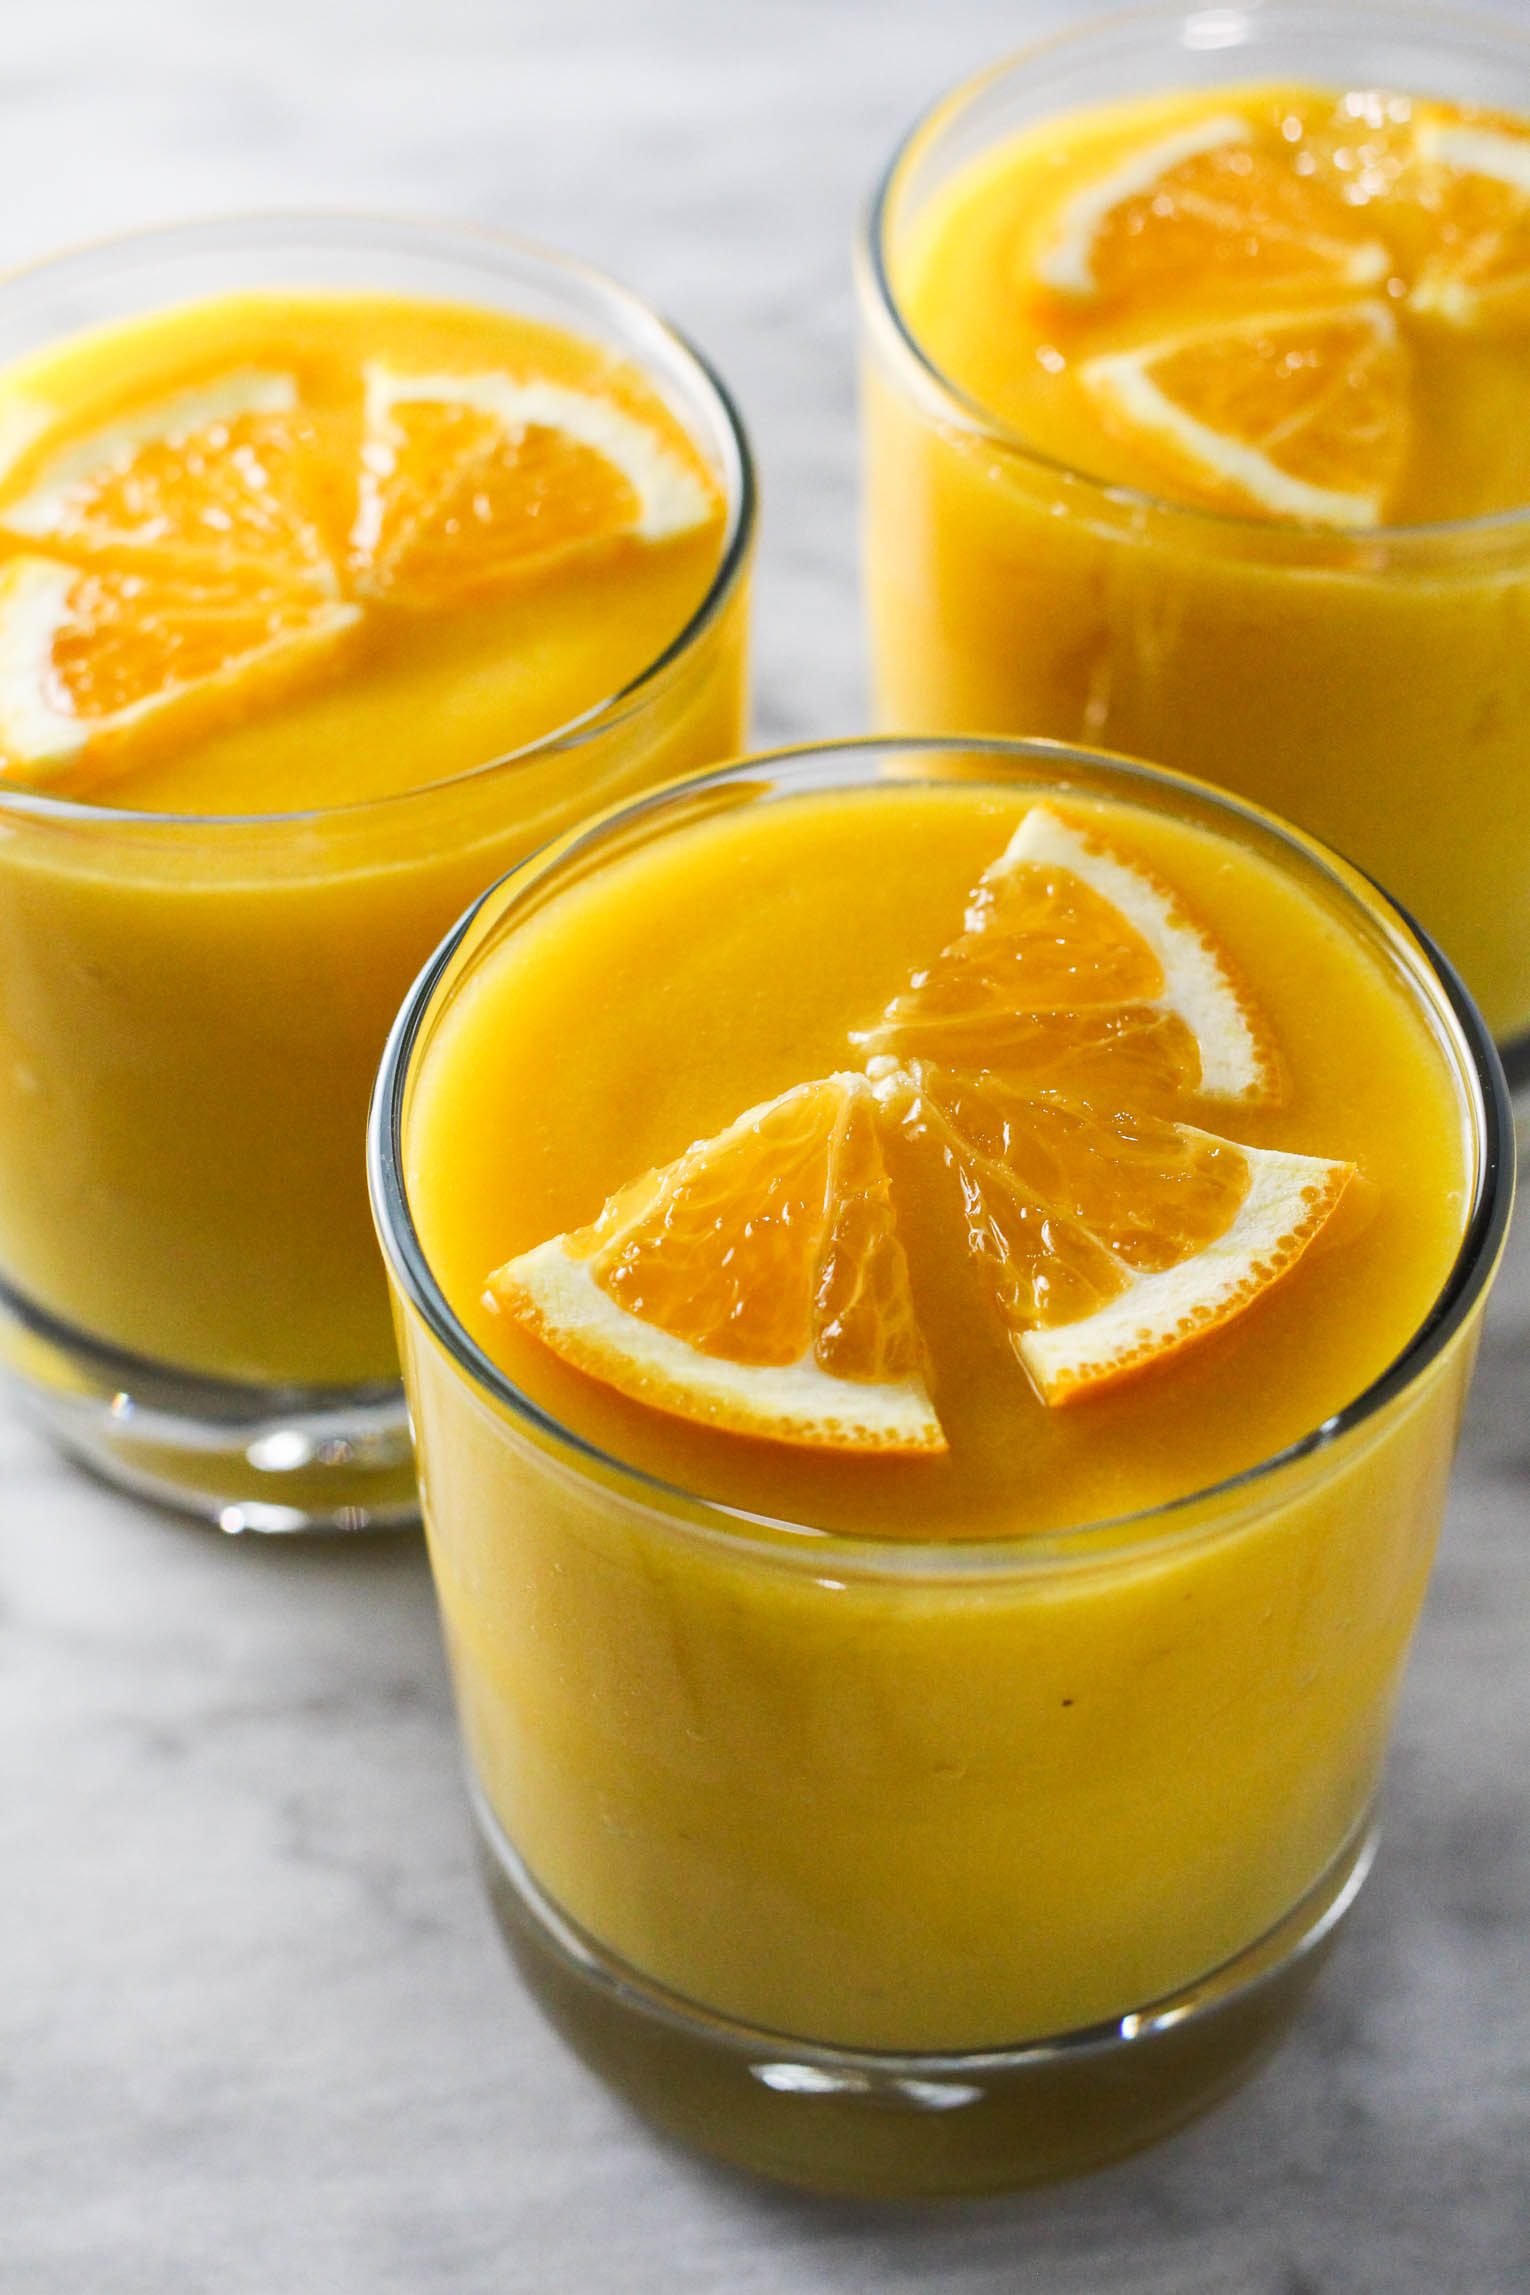 Three glasses of orange mango smoothie standing on marble background. The smoothies are garnished with orange slices.